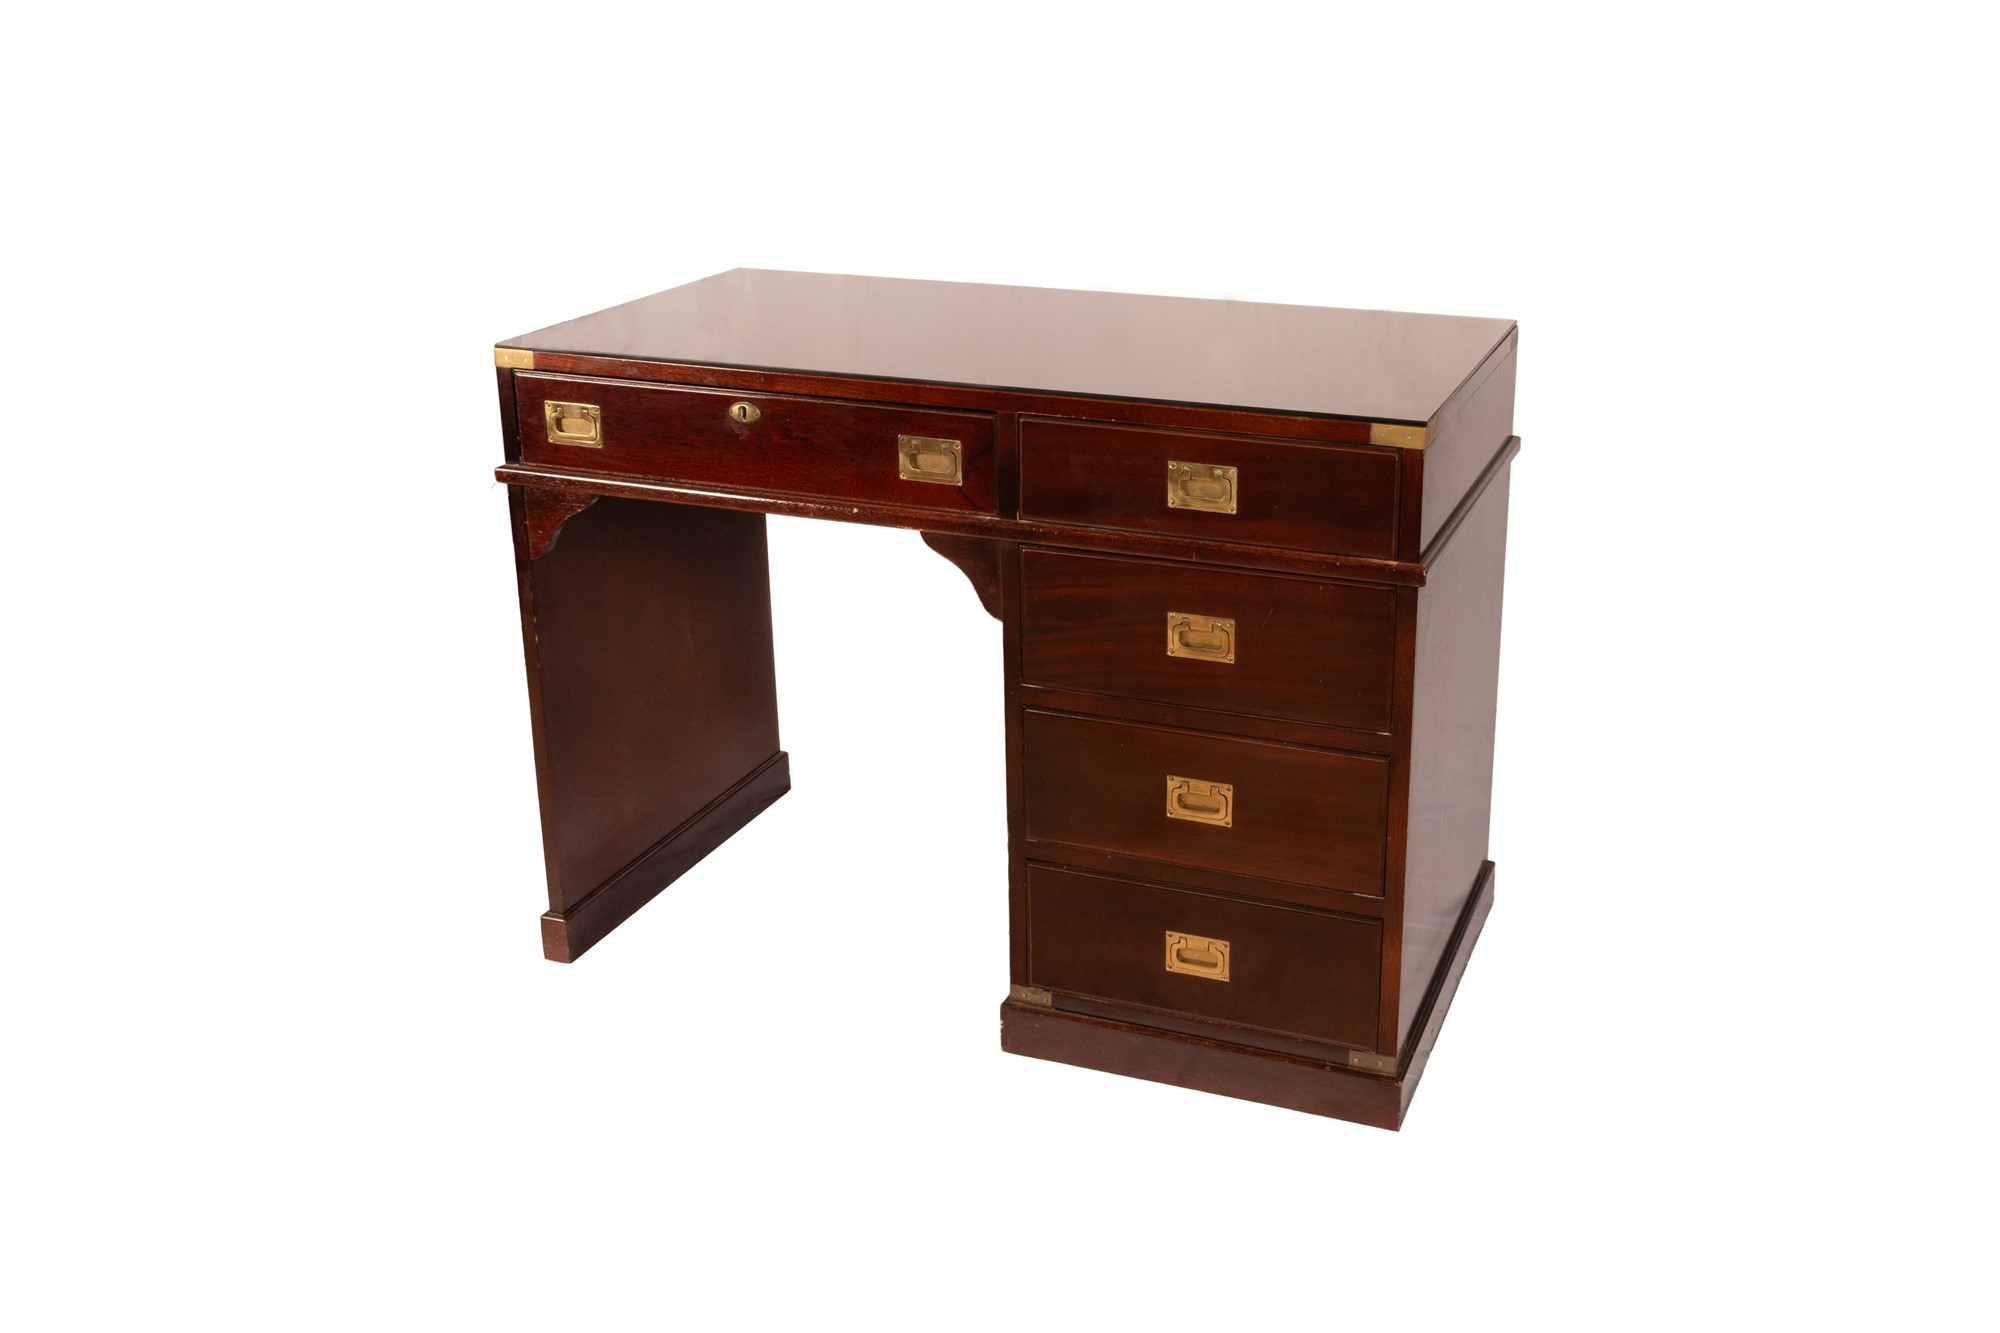 Byron marine style mahogany desk with five drawers on the front and glass top - Image 7 of 19